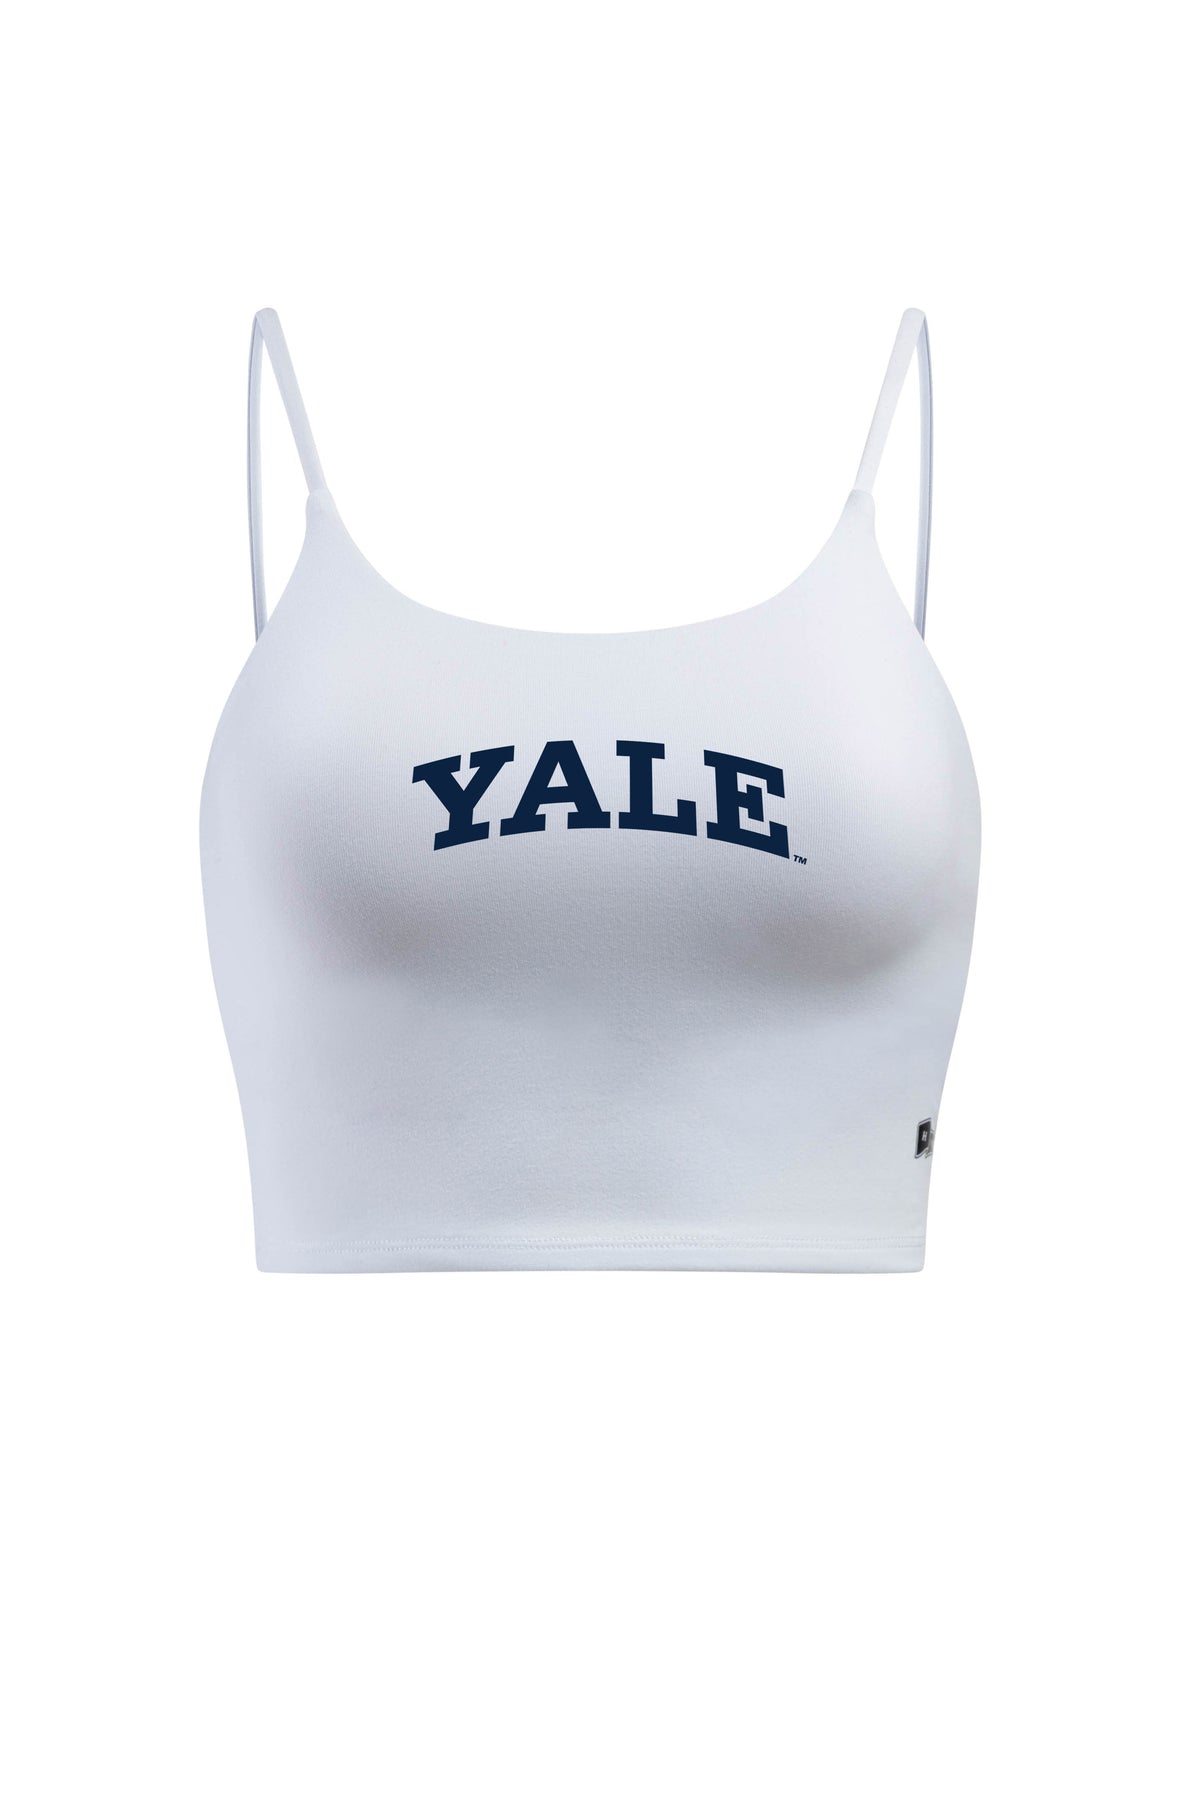 Yale University Apparel: Shop the Coolest YU Gear Here!